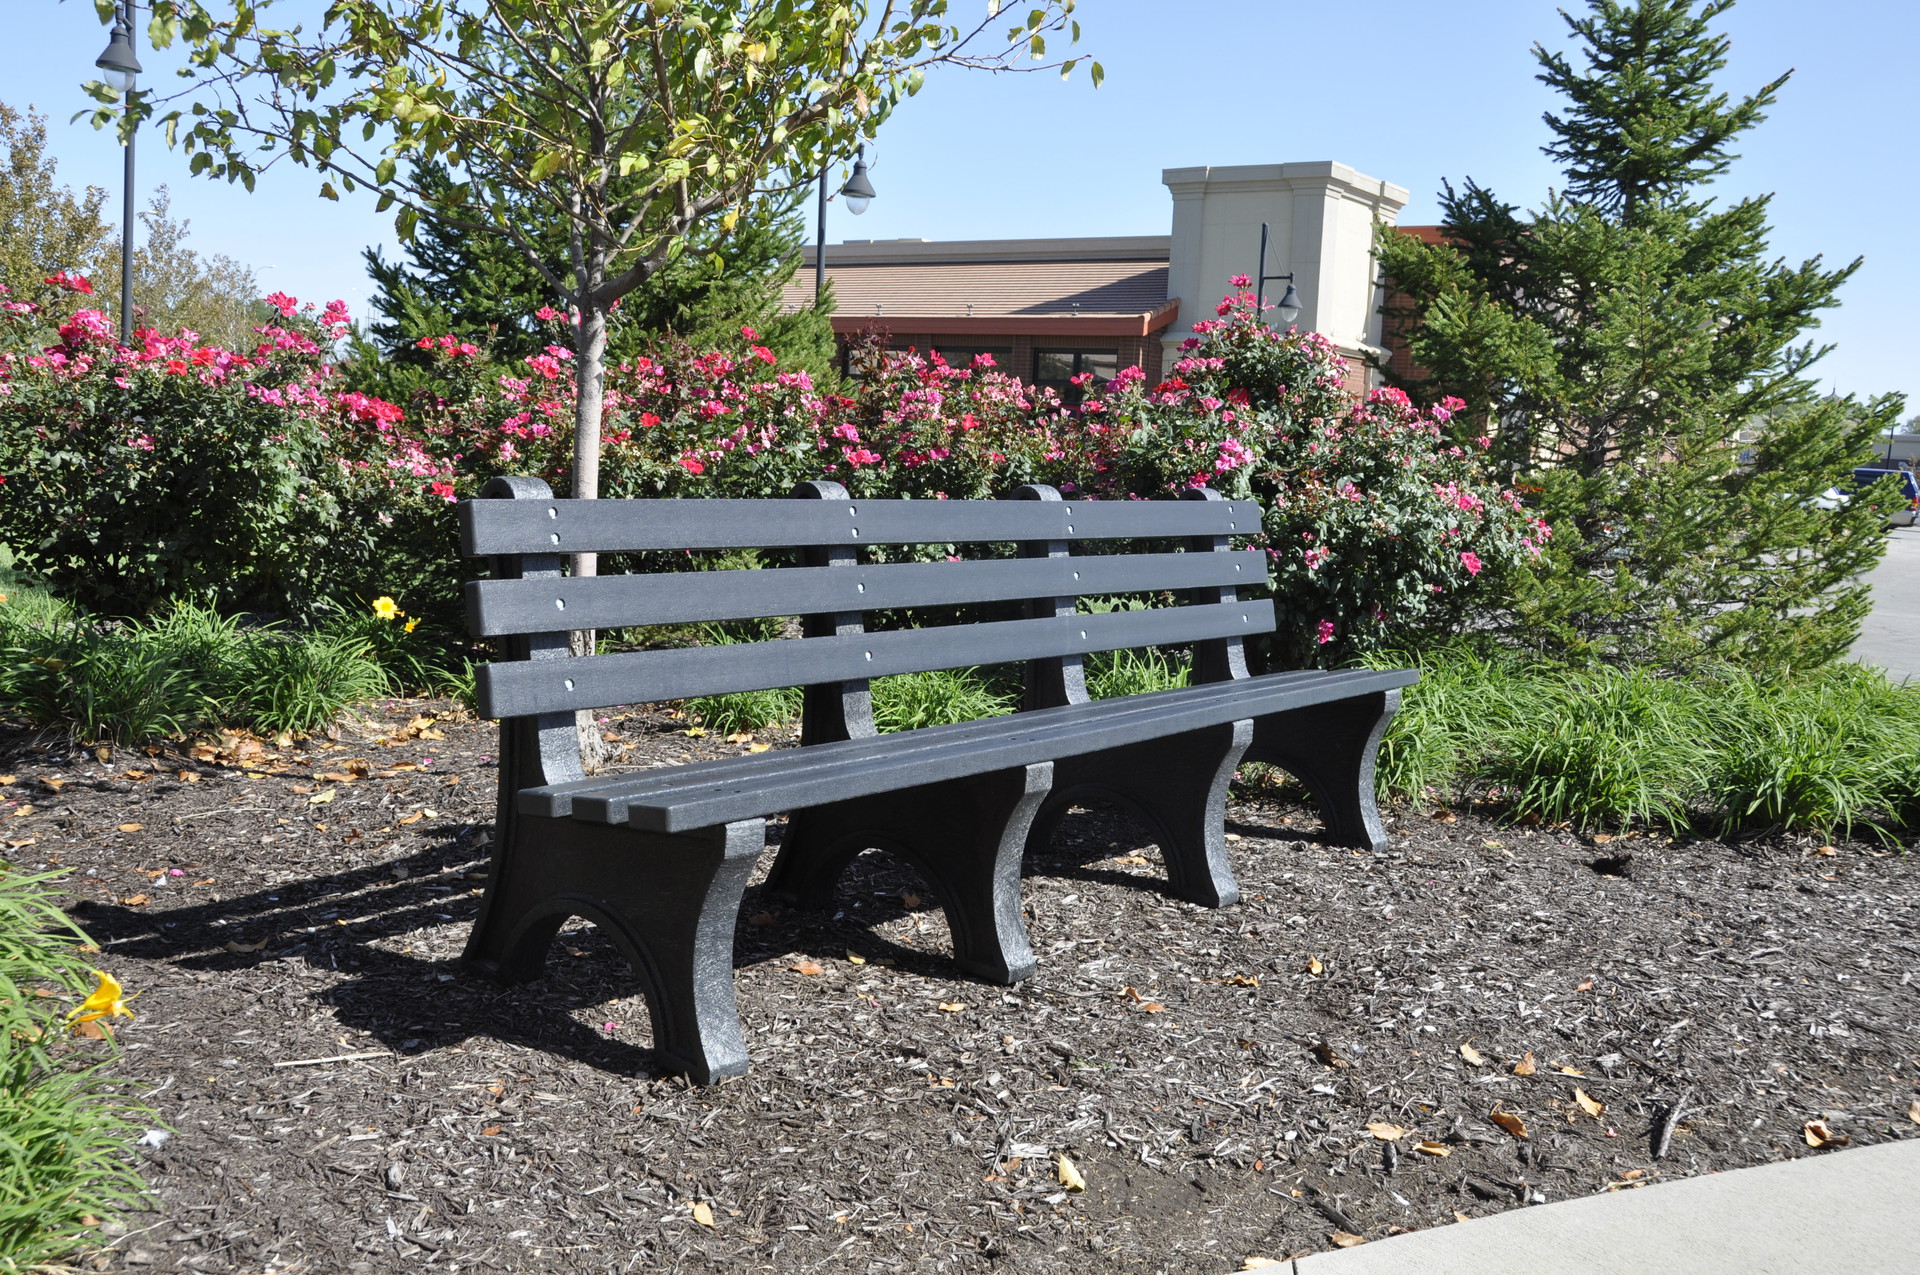 HDPE Deluxe Bench